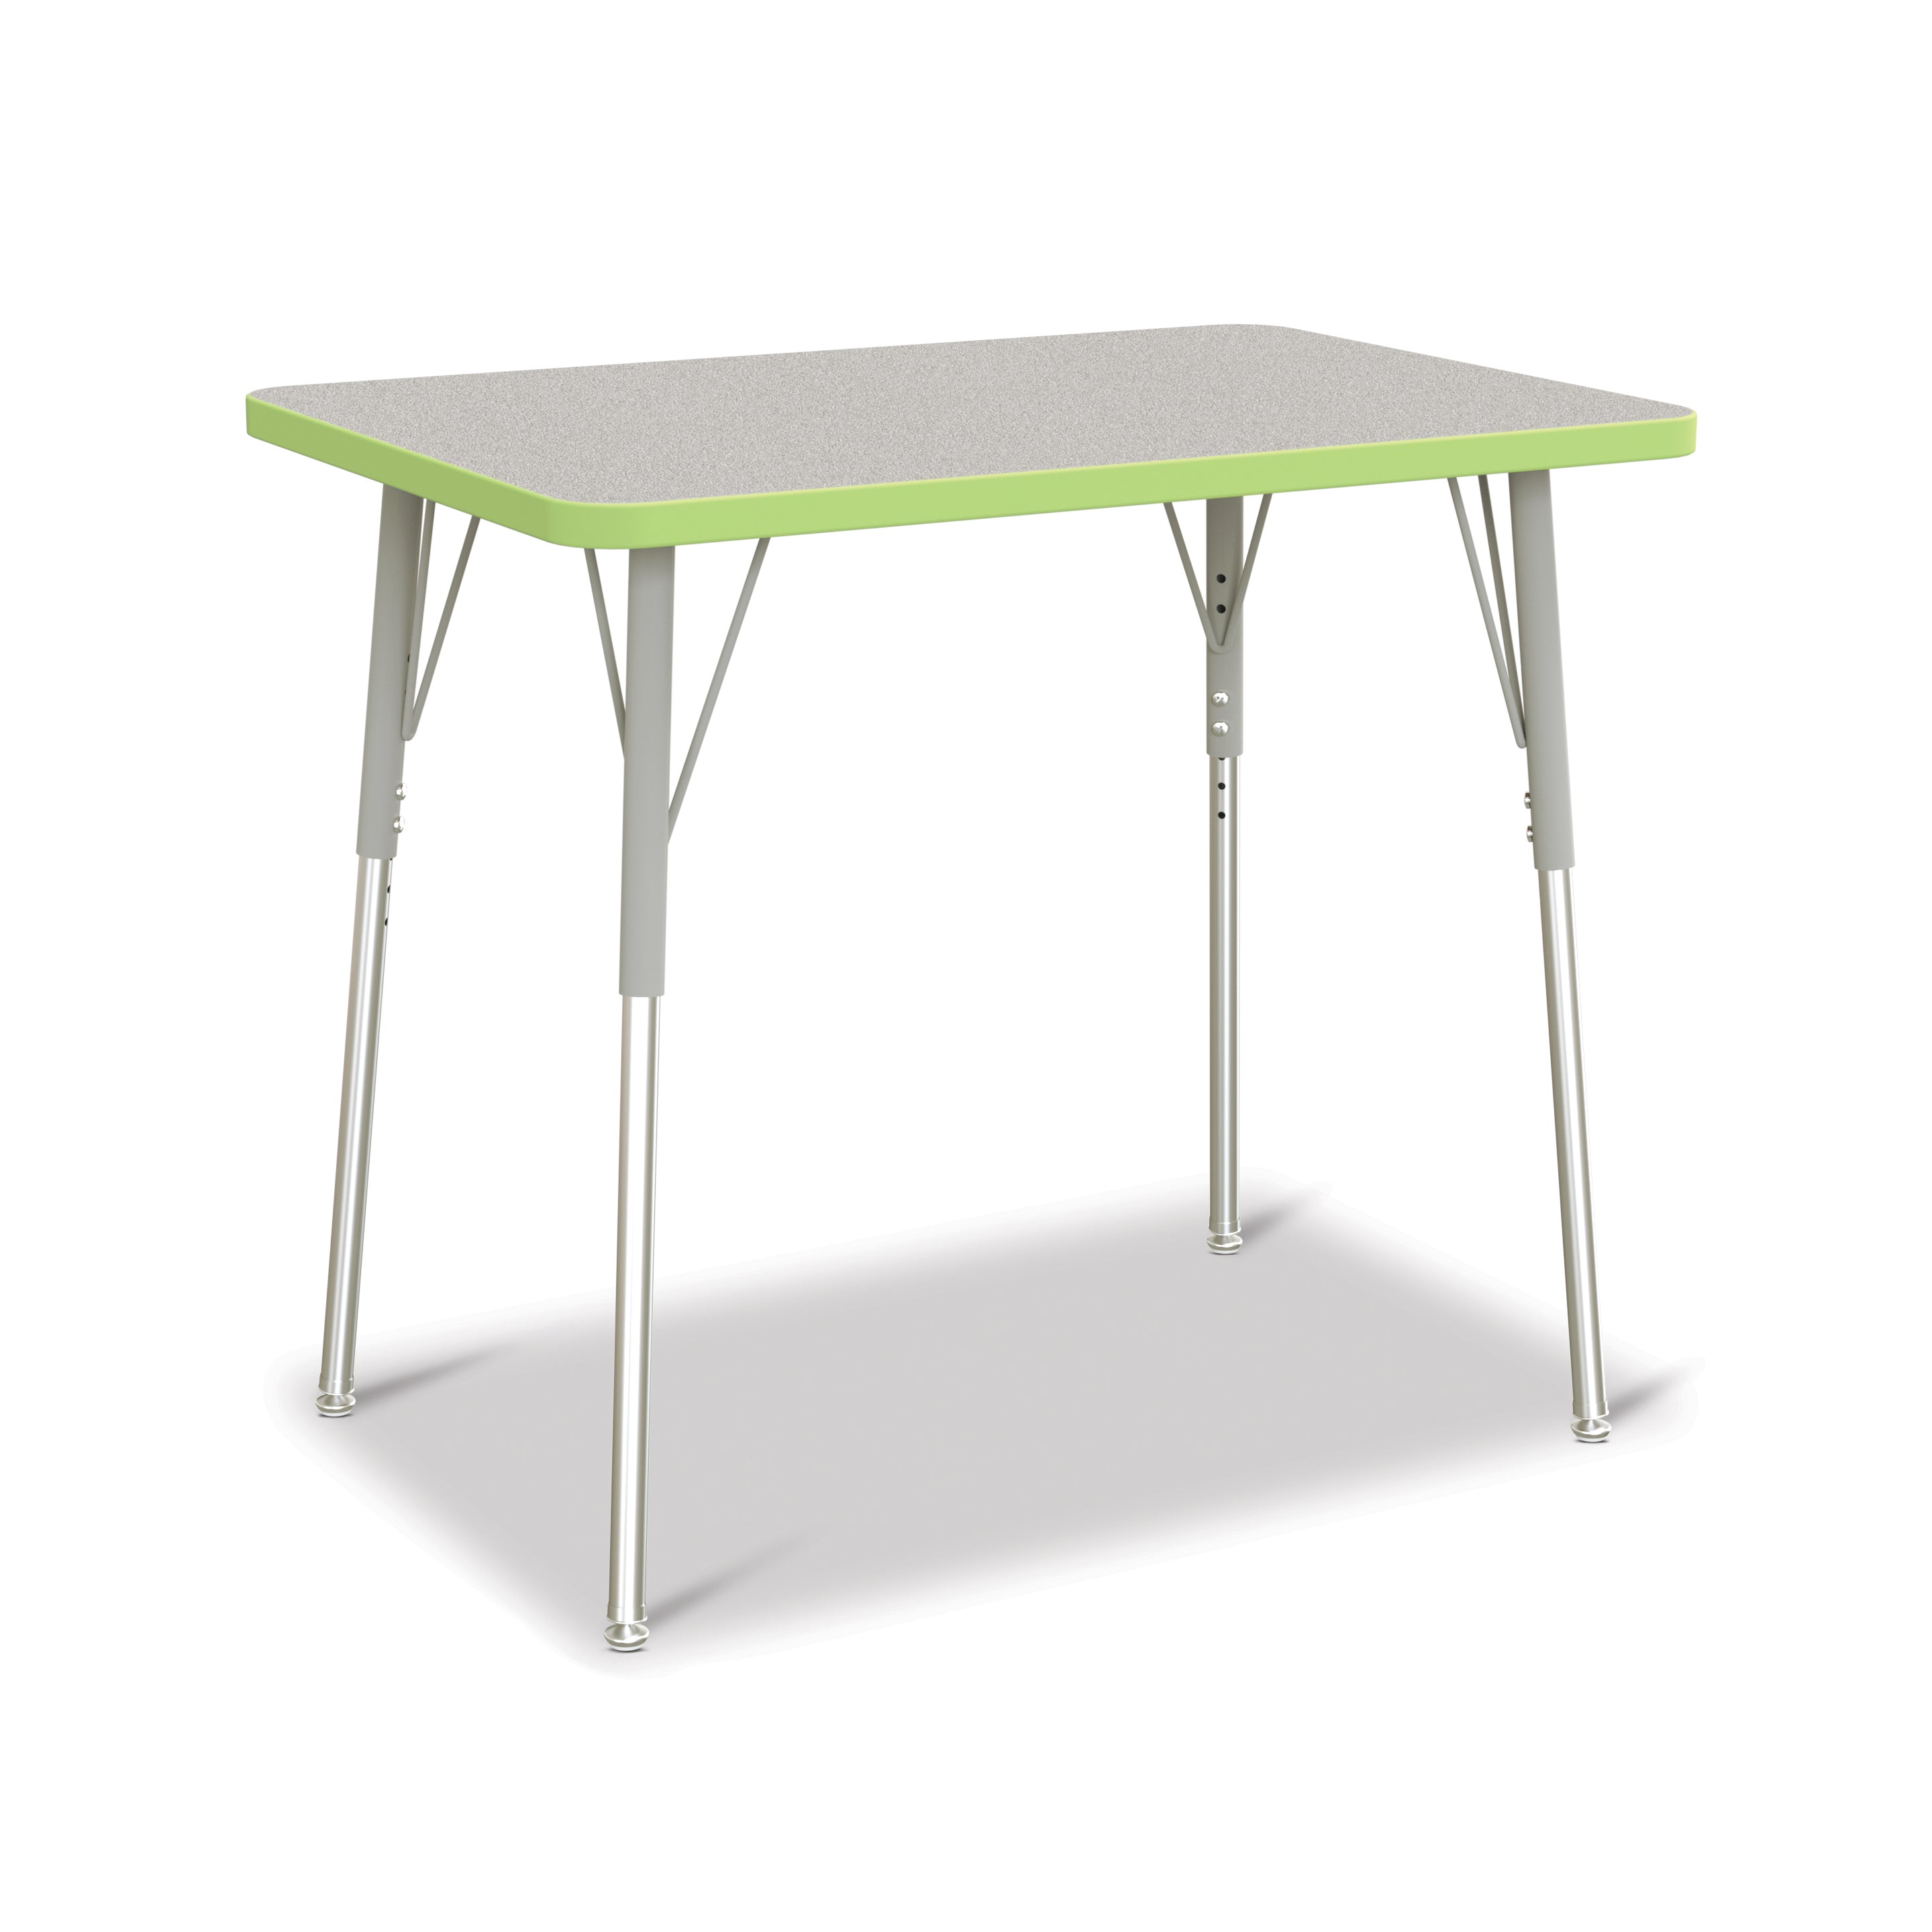 6478JCA130, Berries Rectangle Activity Table - 24" X 36", A-height - Freckled Gray/Key Lime/Gray